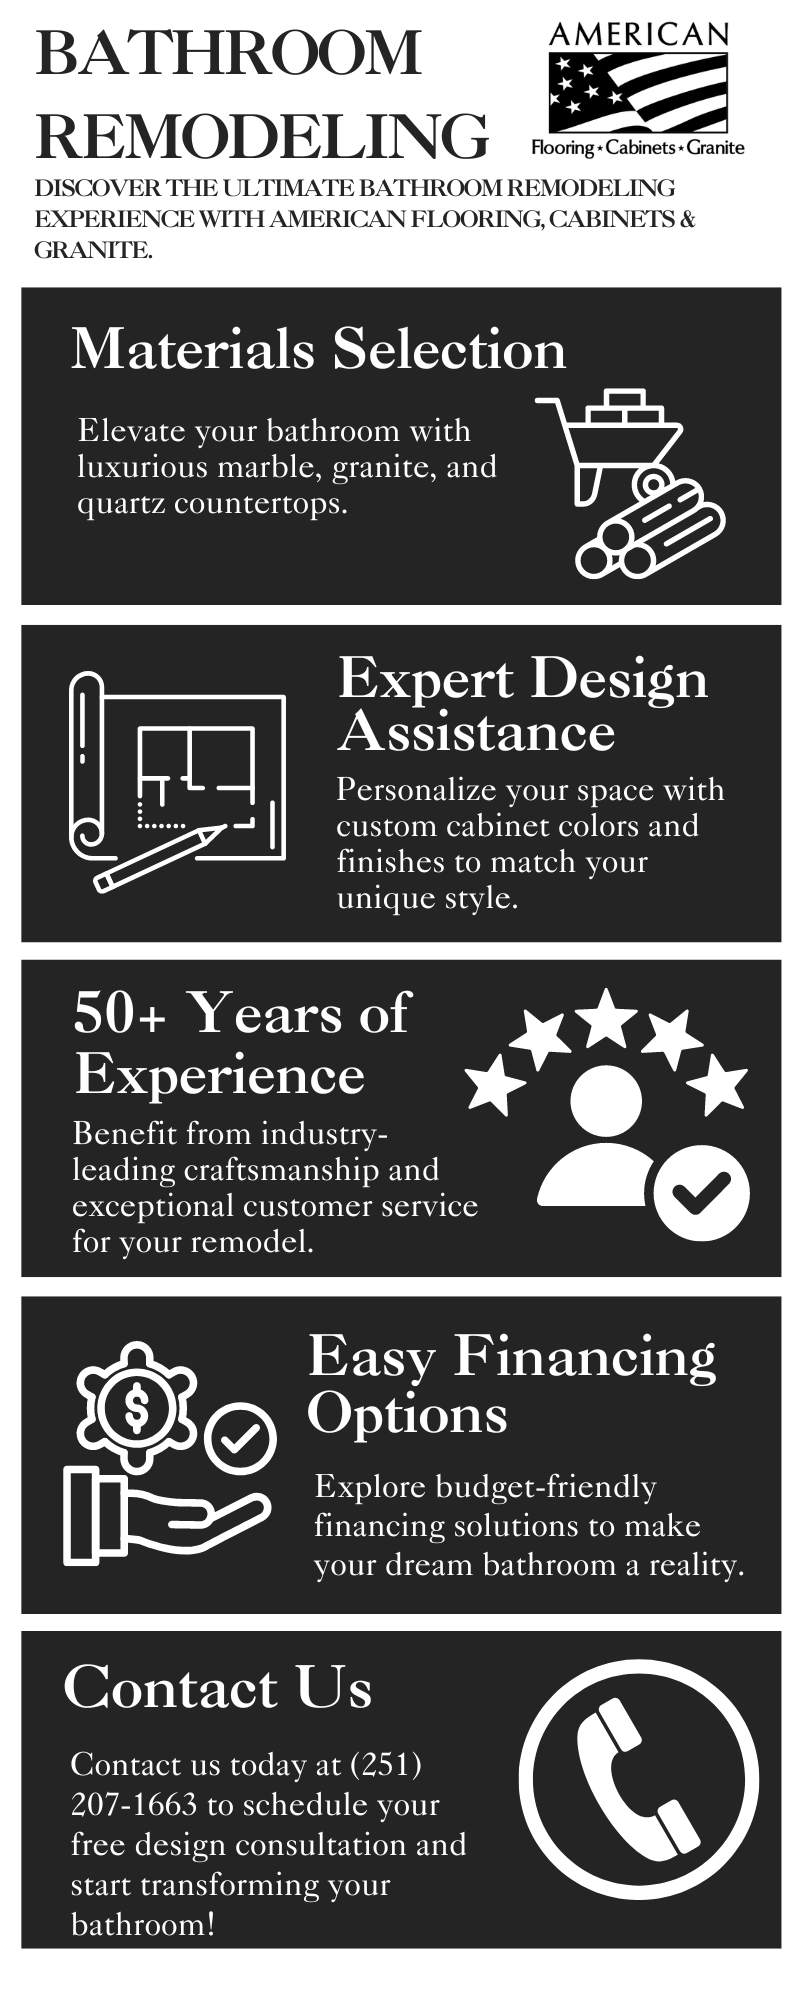 M51398 - Infographic  - Bathroom Remodeling.png